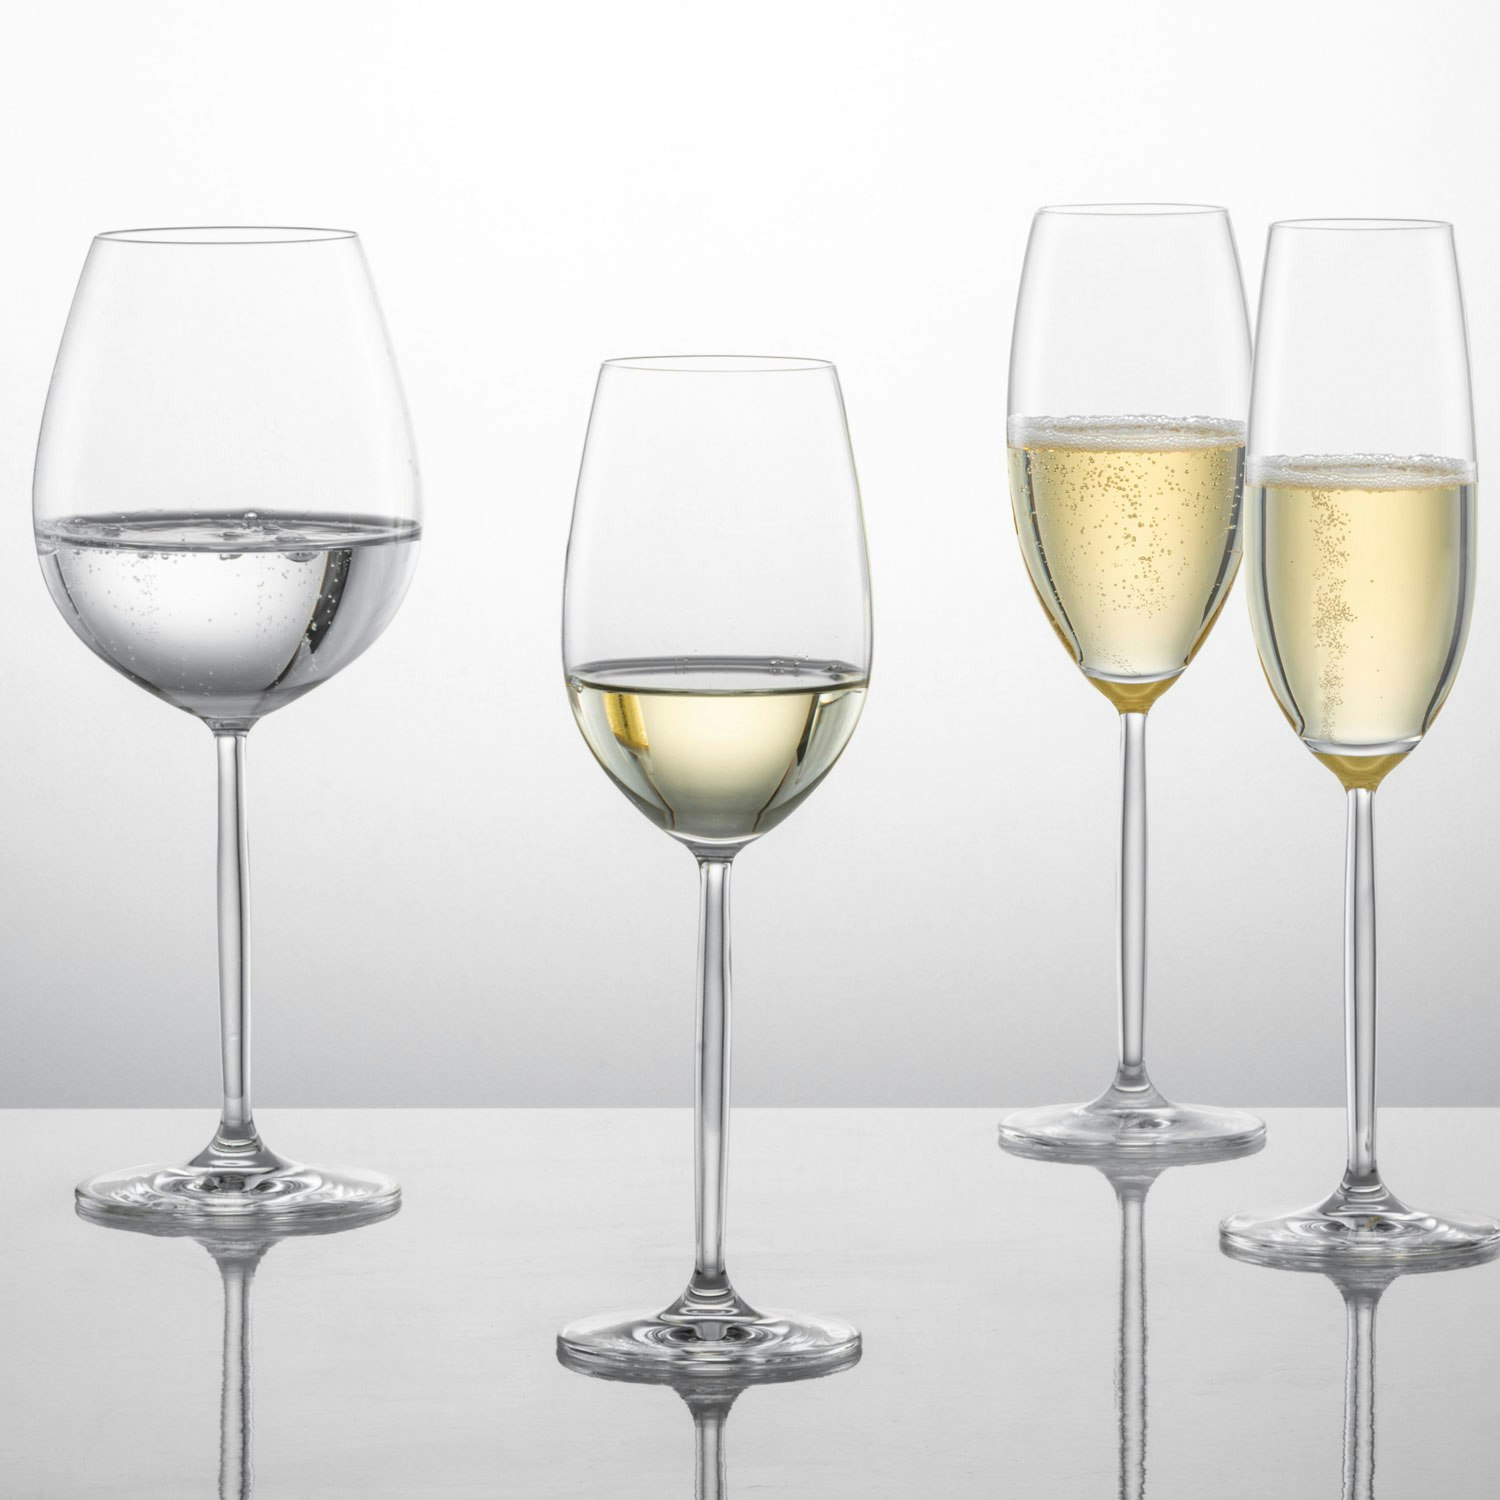 https://royaldesign.com/image/2/zwiesel-diva-champagne-glass-30-cl-2-pack-2